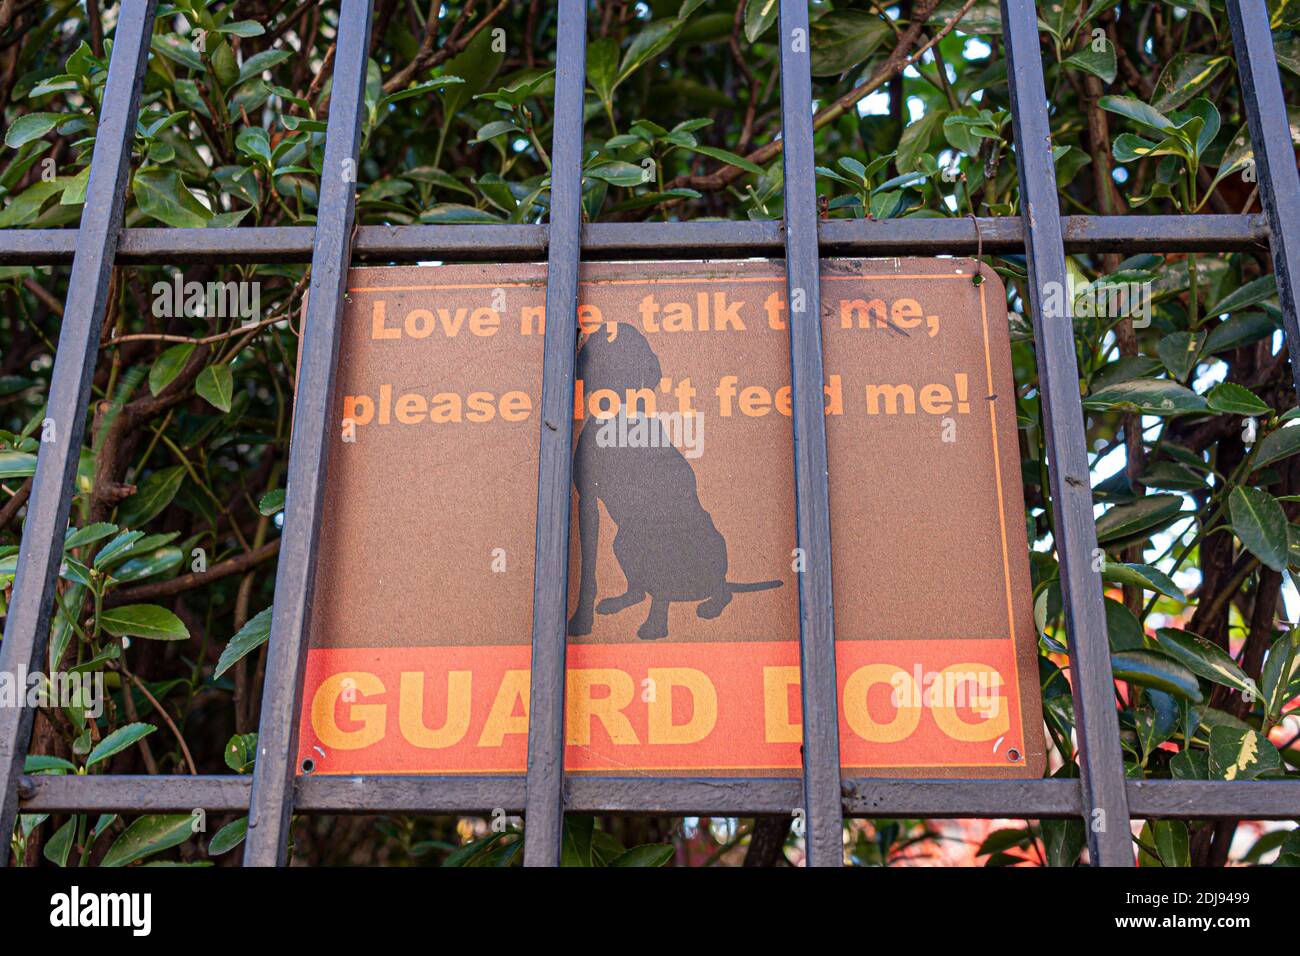 A metal sign attached to the fences surrounding a property. It says Guard Dog and Do not feed the dog. It has a dog symbol in it. Isolated close up lo Stock Photo